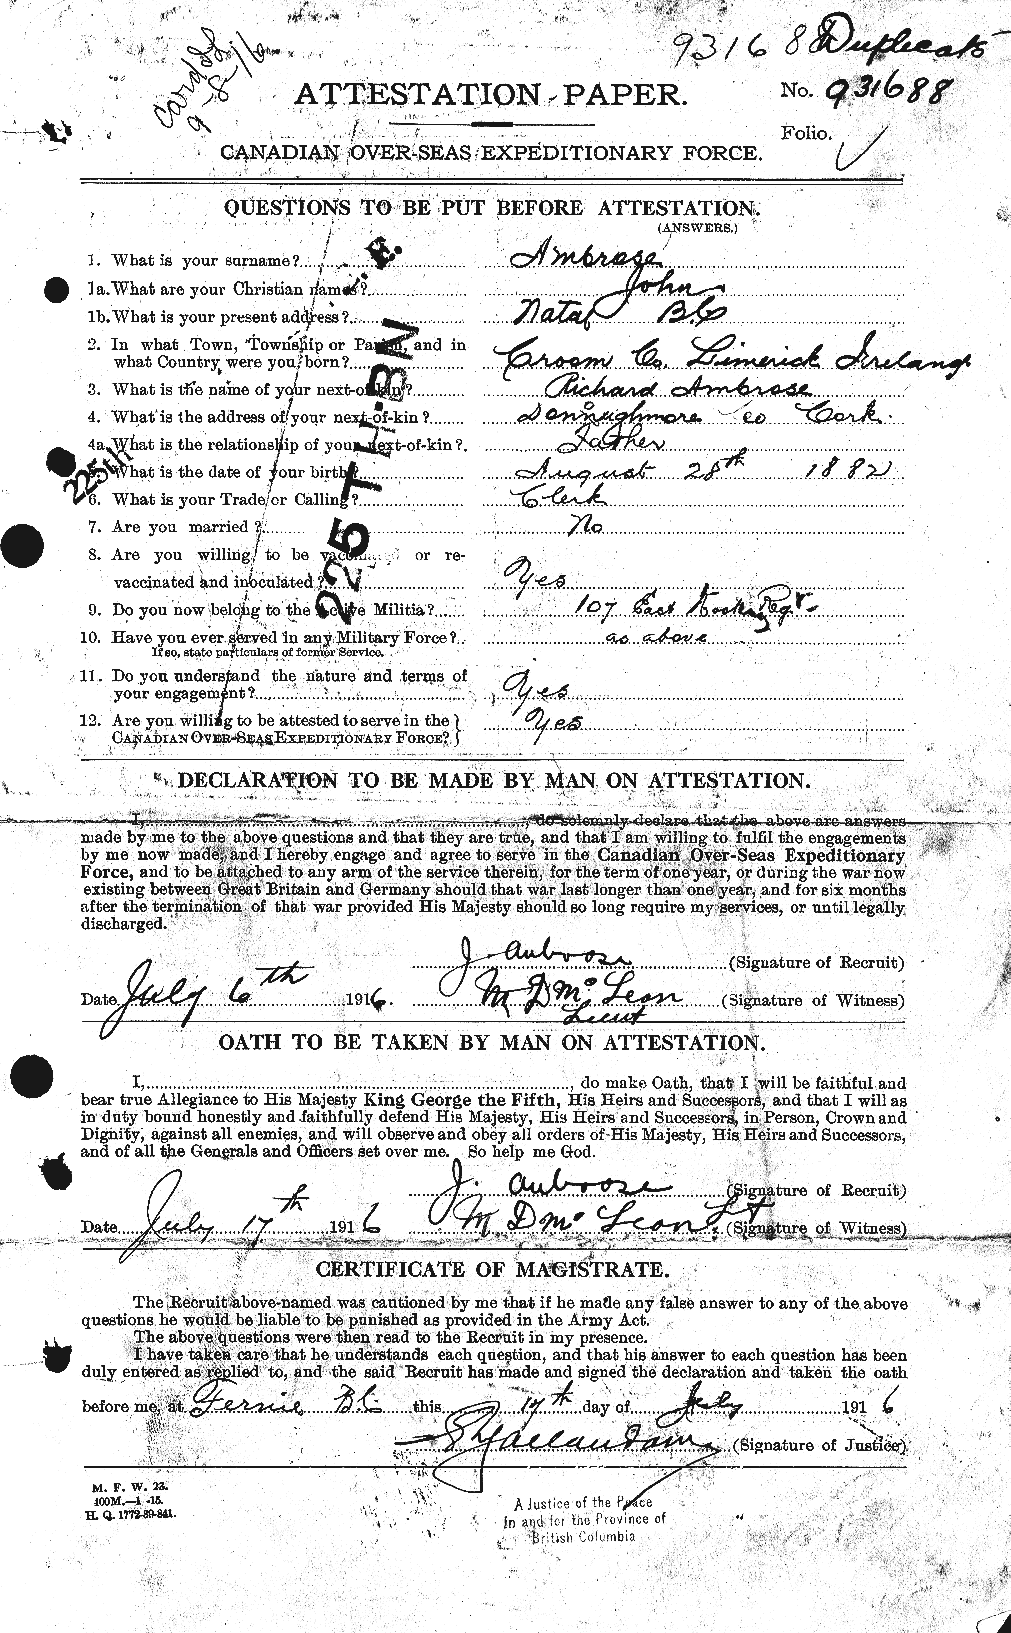 Personnel Records of the First World War - CEF 208933a